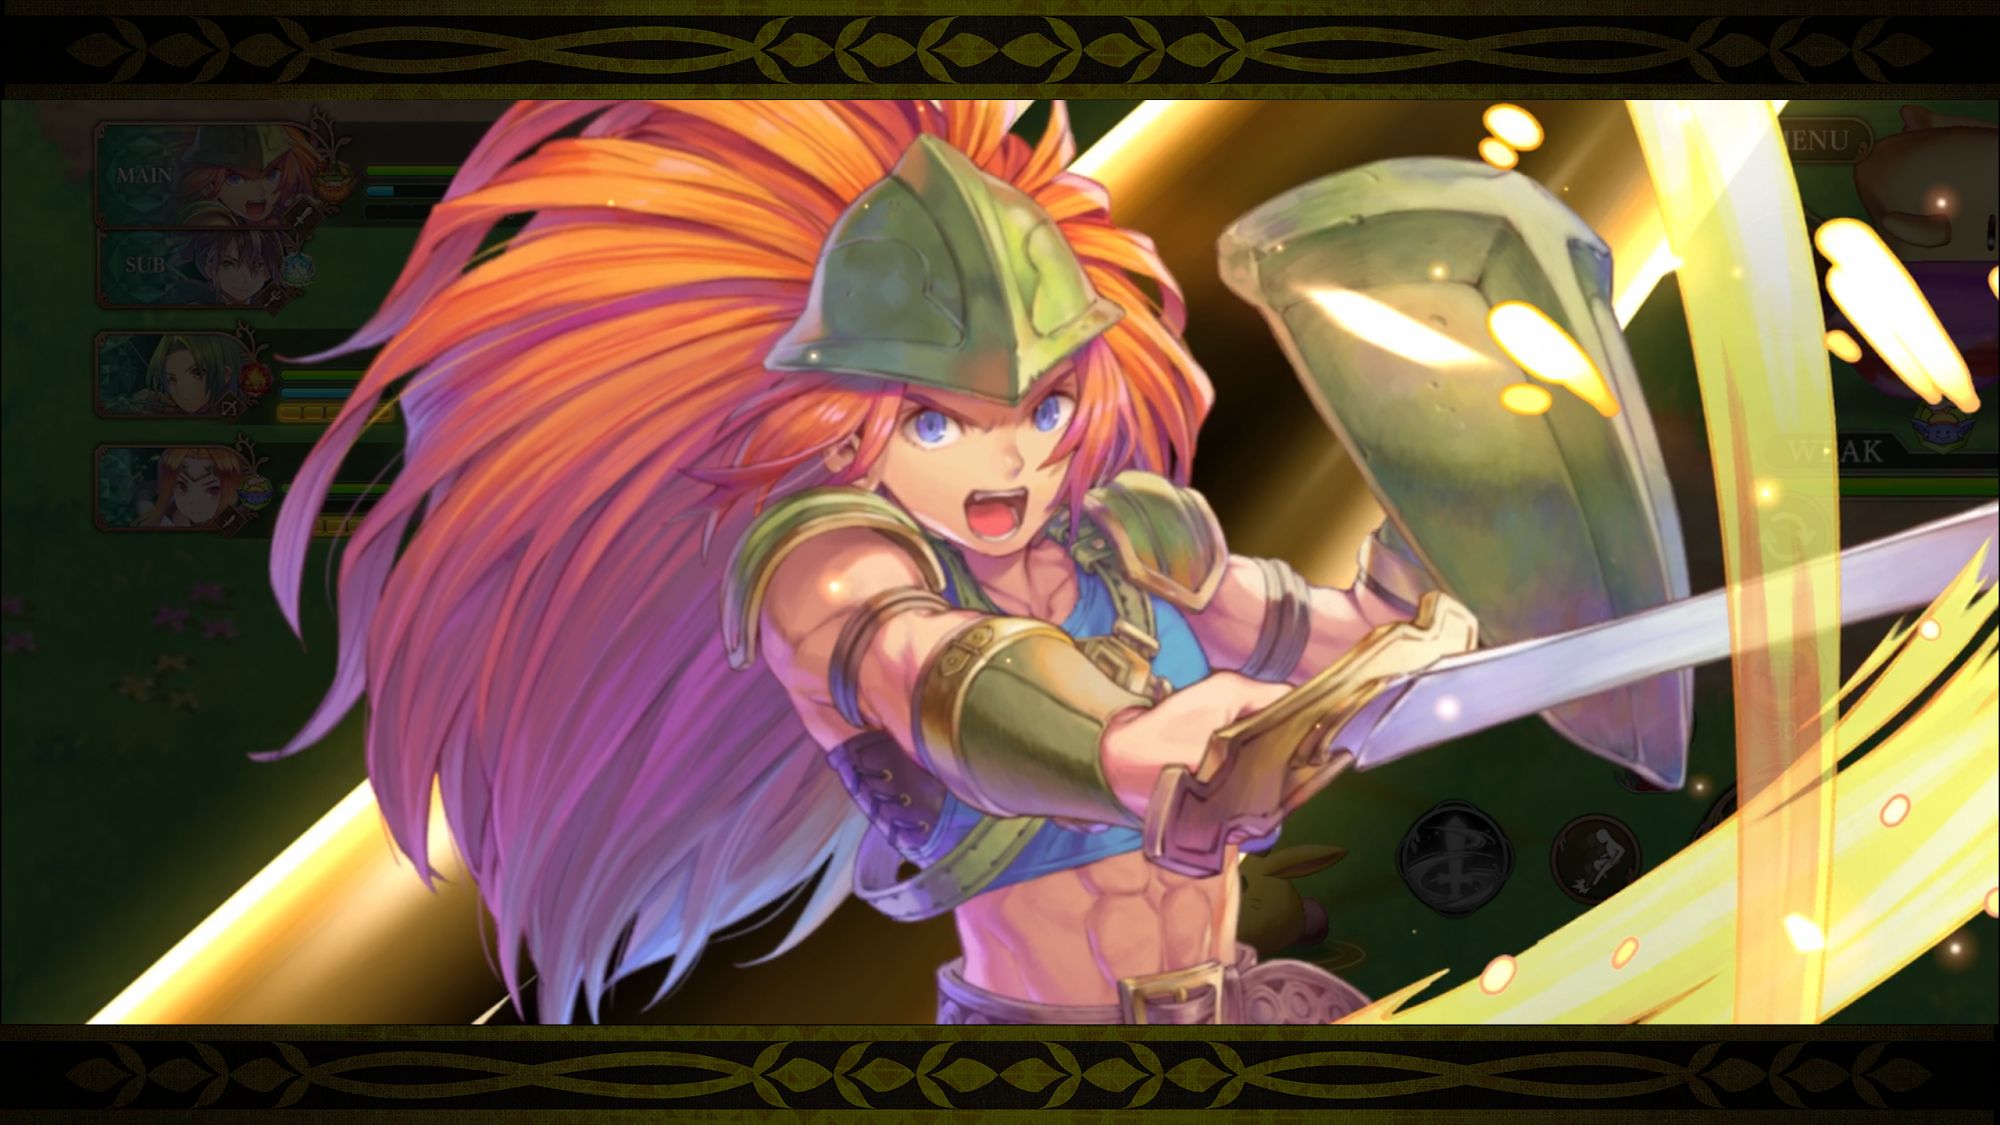 Scarica ECHOES of MANA gratis per Android.